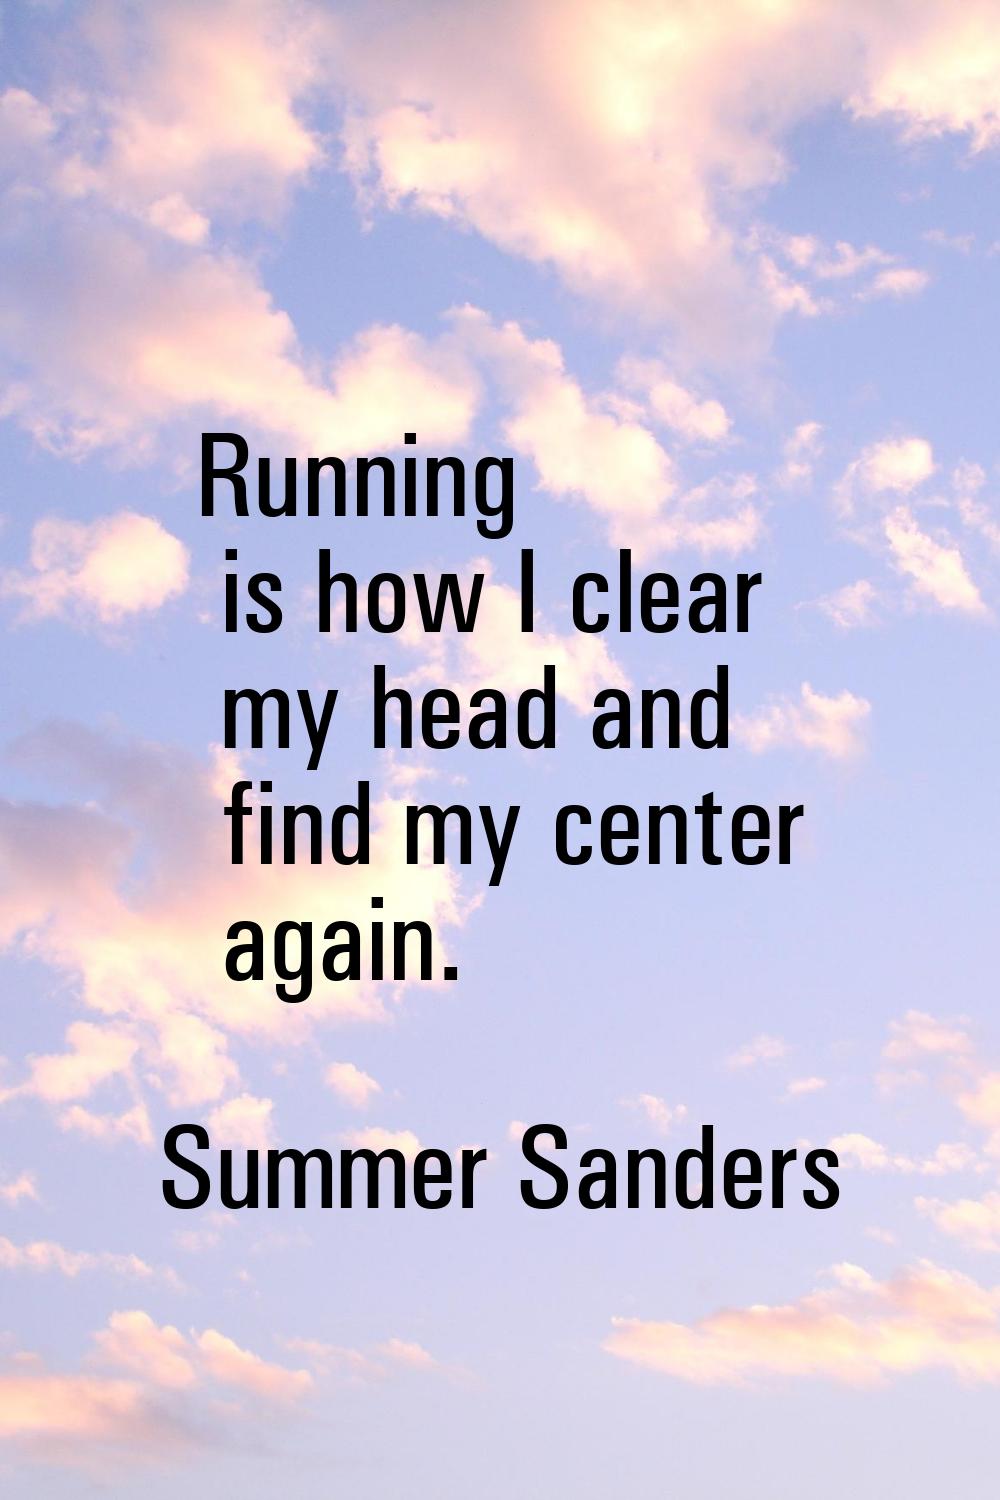 Running is how I clear my head and find my center again.